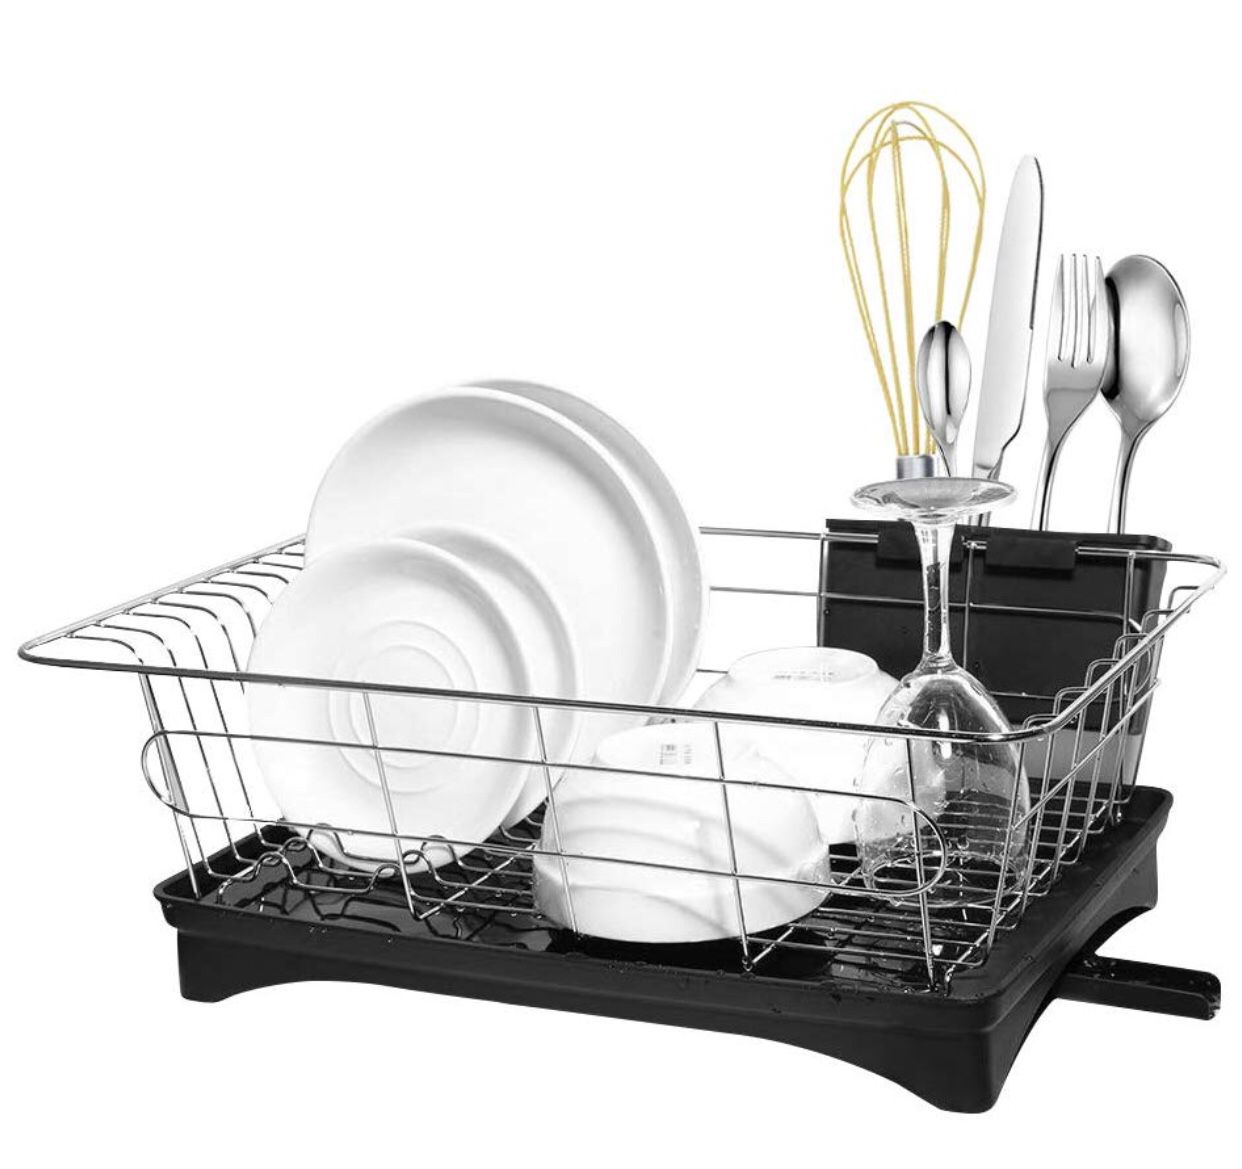 1Easylife Adjustable Over the Sink Dish Drying Rack, 3 Tier Stainless Steel  Kitchen Rack Dish Drainers for Sale in Ceres, CA - OfferUp